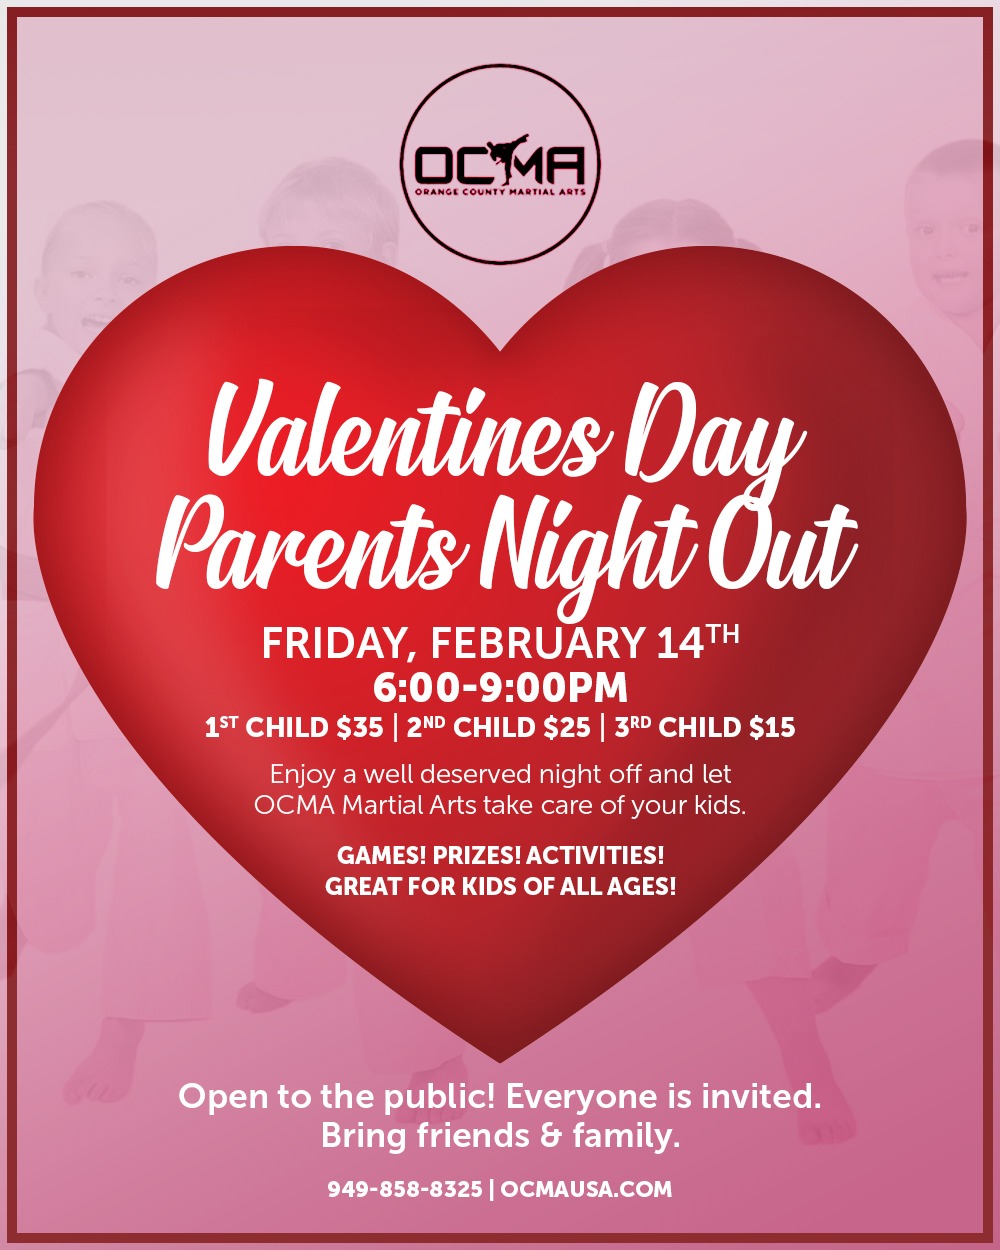 Valentines Day Parents Night Out